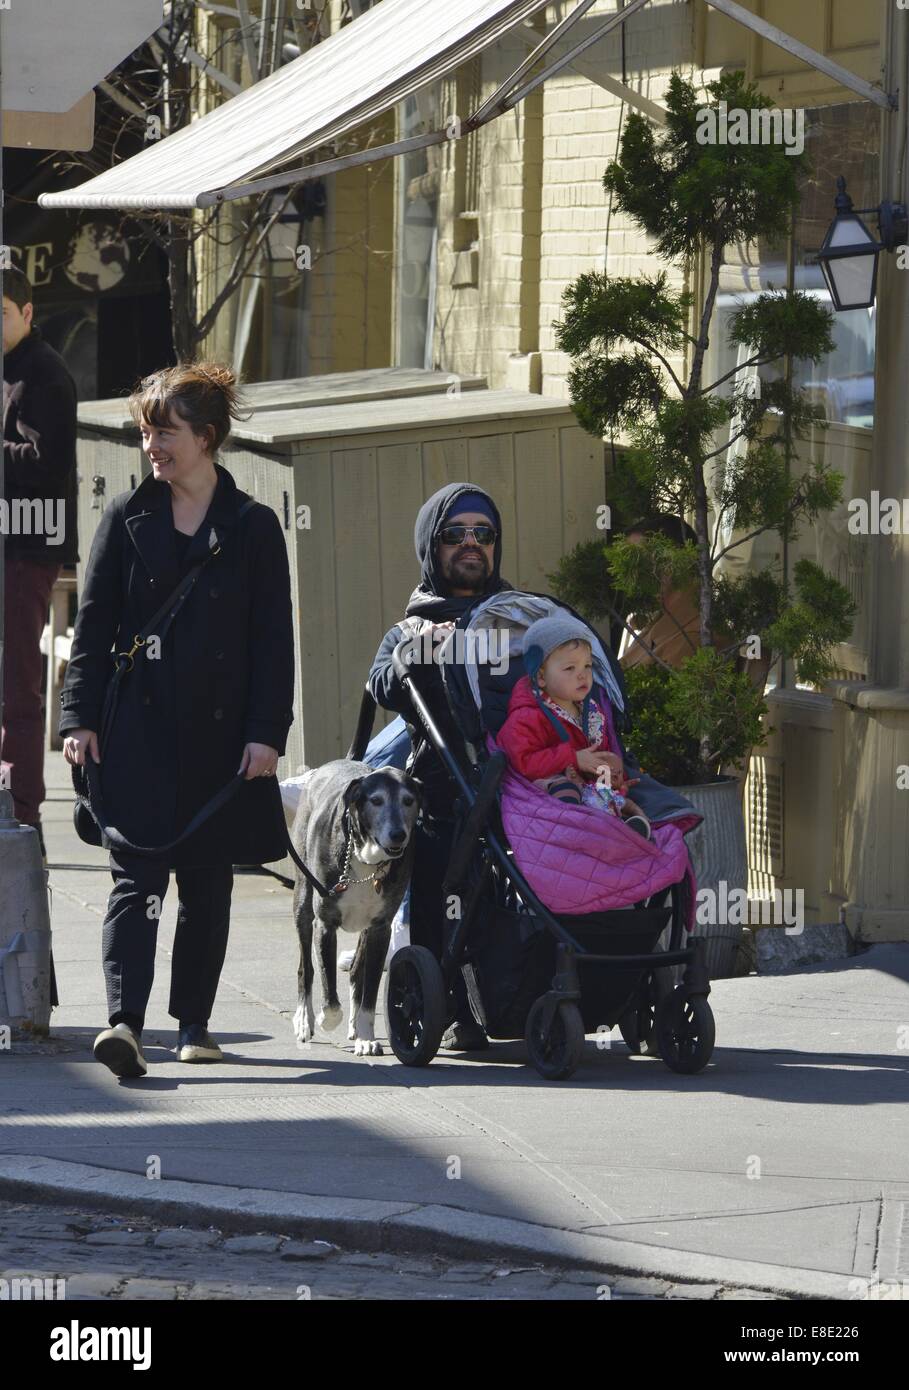 Peter Dinklage and family out and about in Manhattan  Featuring: Peter Dinklage,Erica Schmidt,Zelig Dinklage Where: New York City, New York, United States When: 03 Apr 2014 Stock Photo